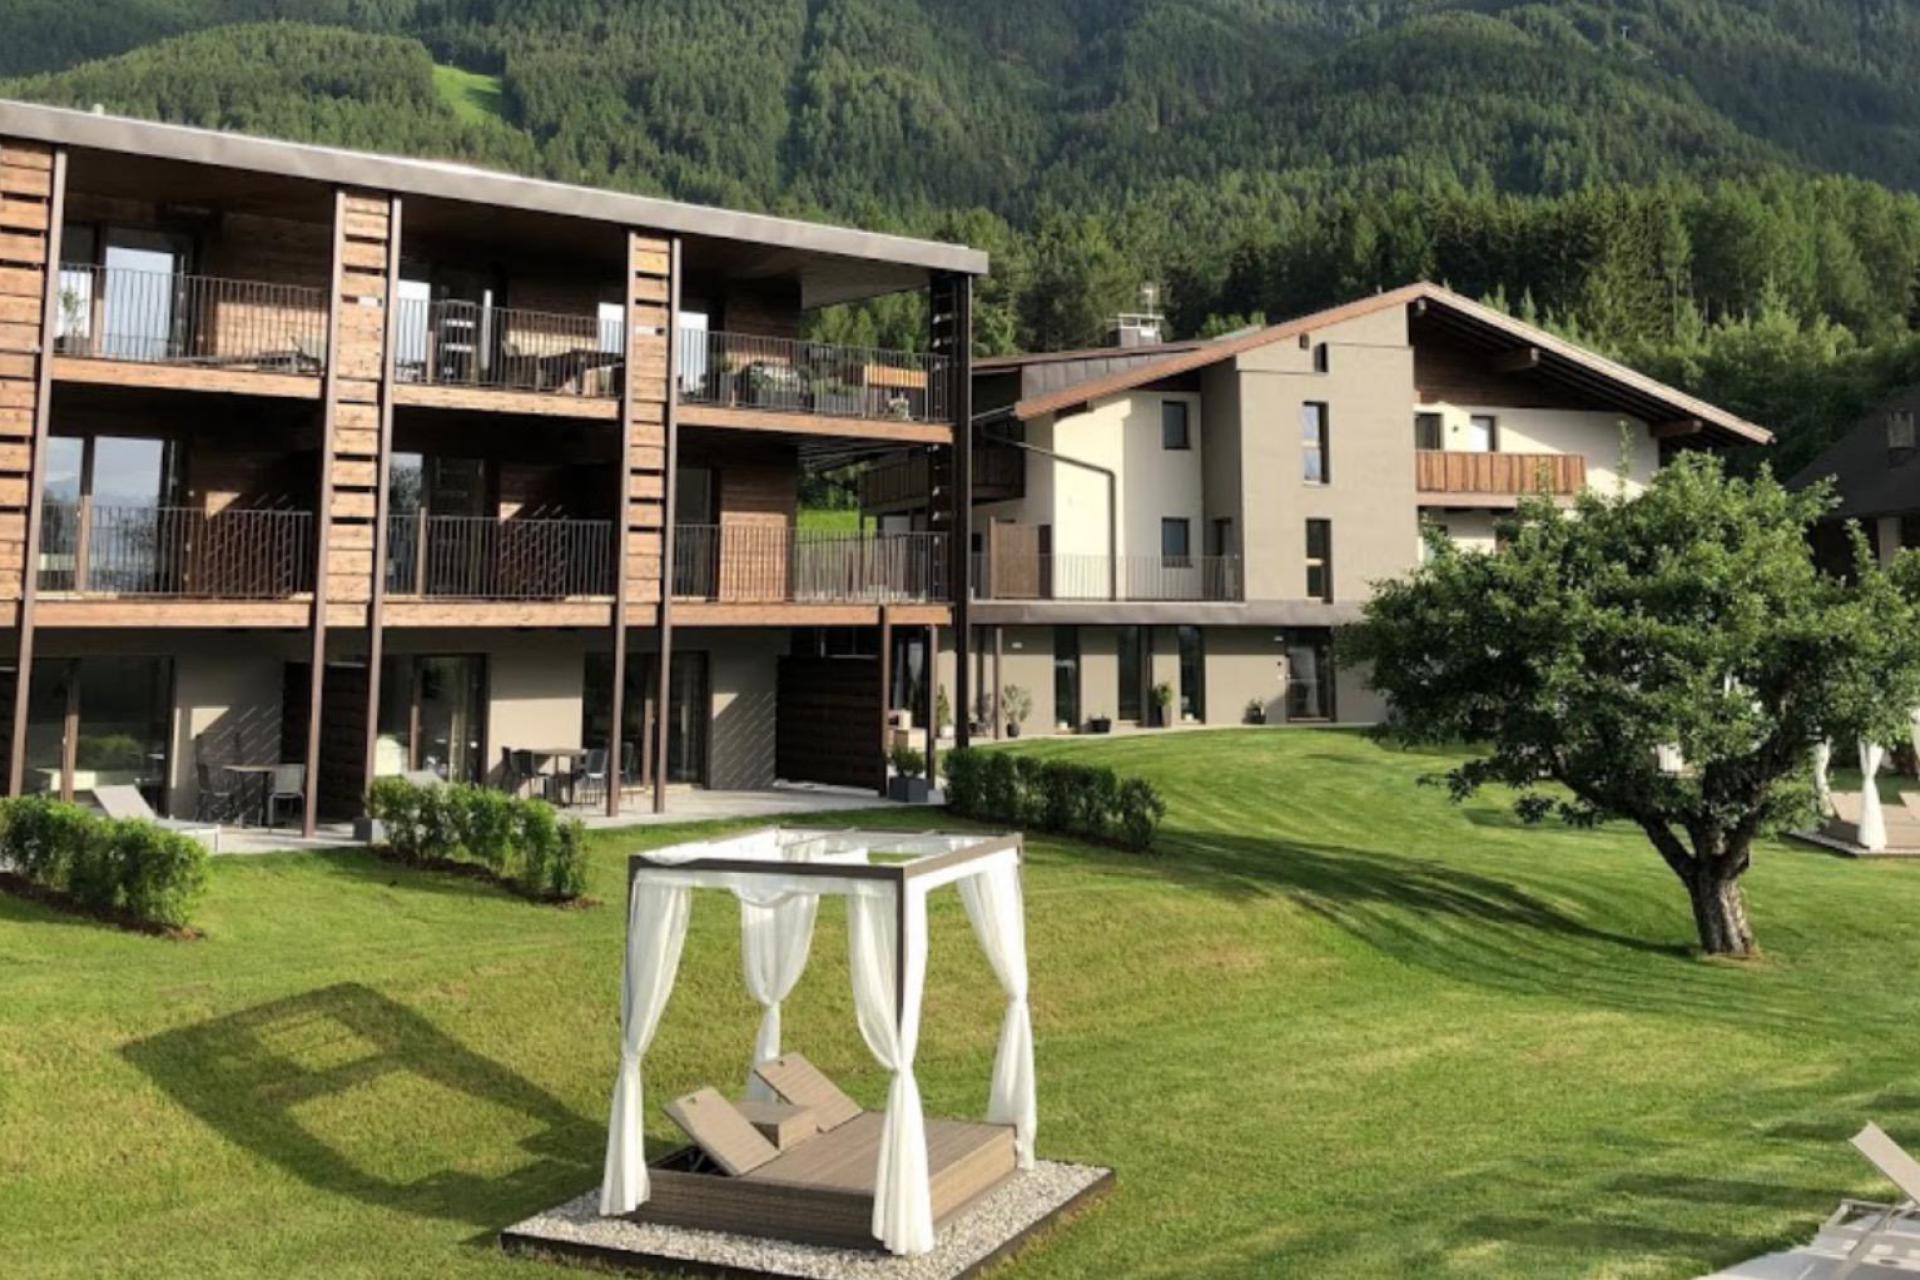 Agriturismo Dolomites Residence within walking distance of a village and ski lift